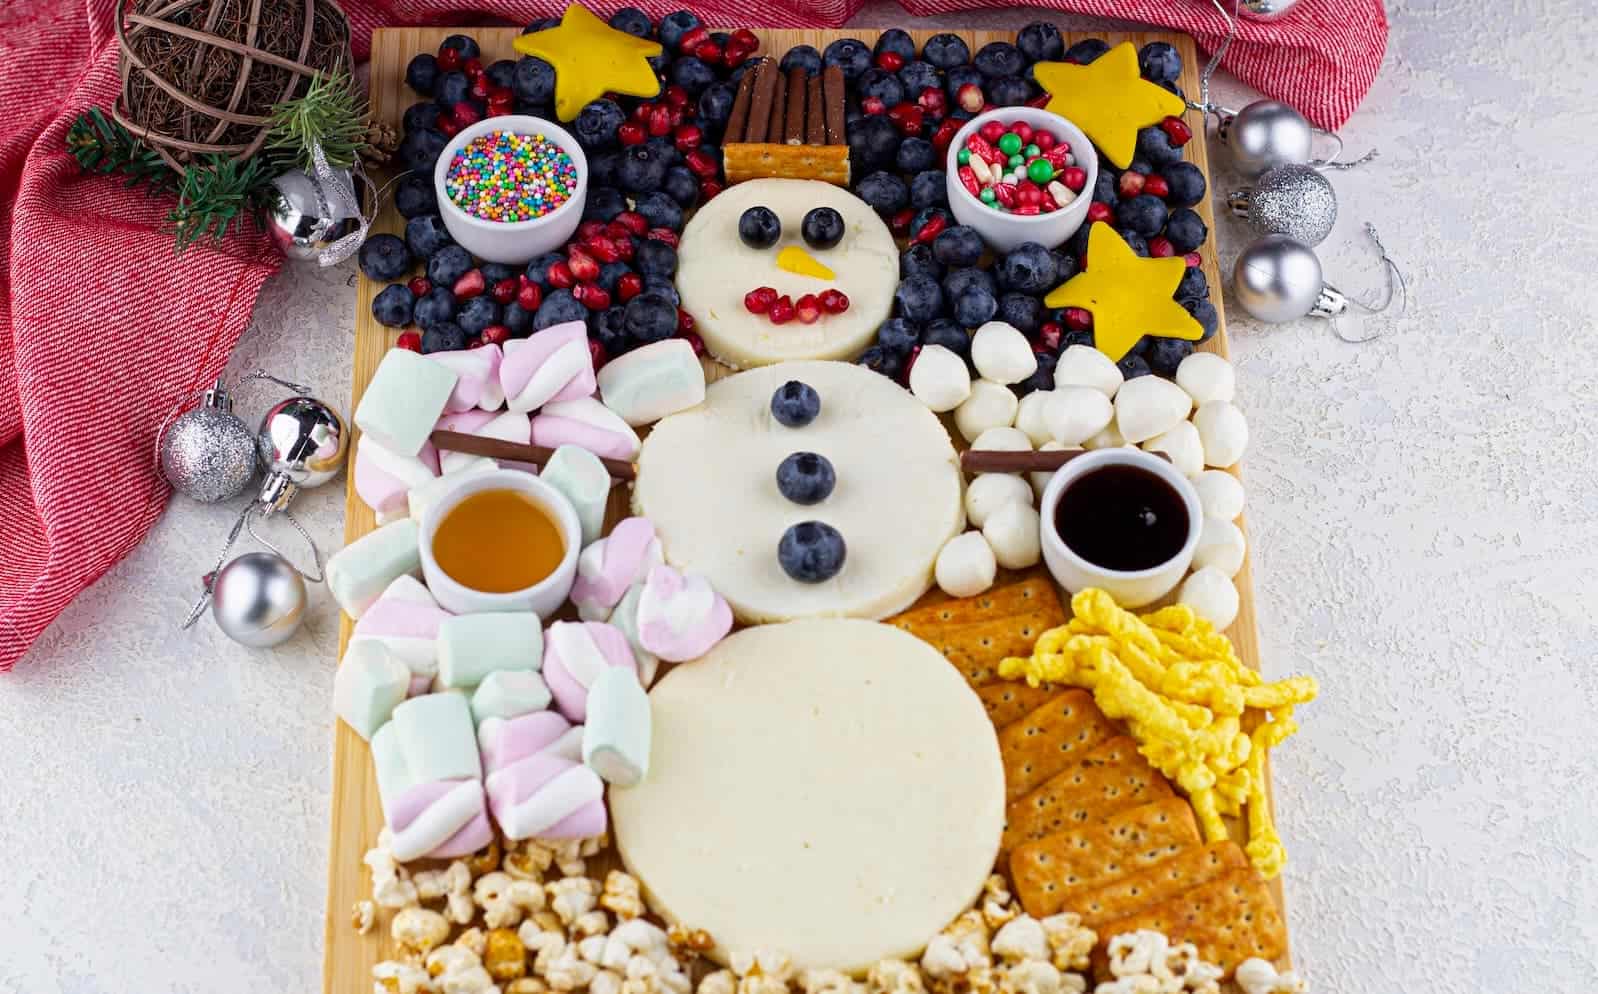 A snowman shaped platter of cheese and crackers.